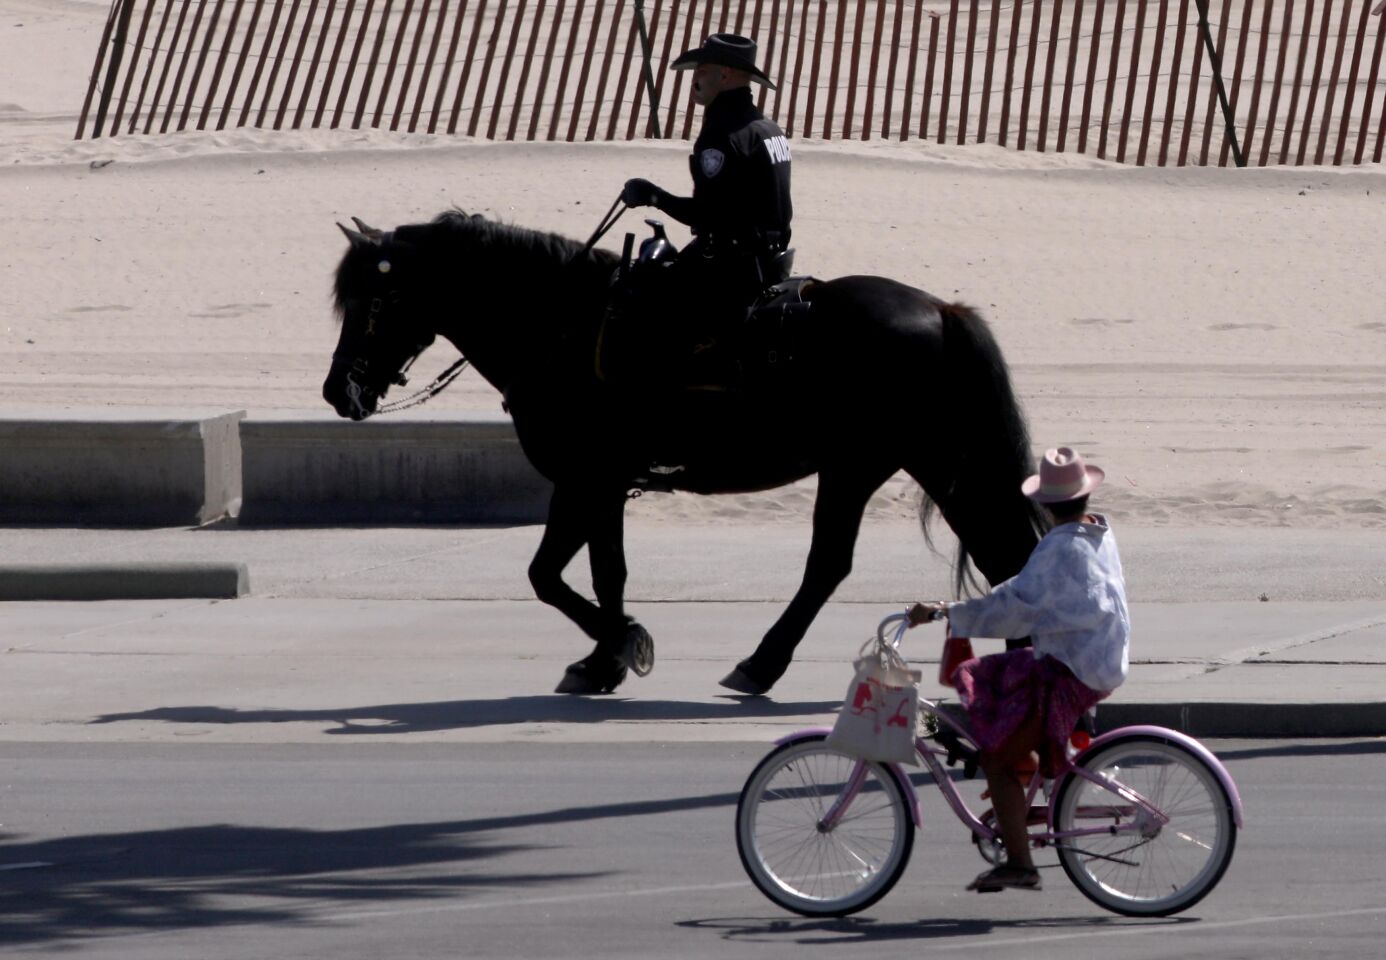 A woman rides a bike past a mounted police officer in Santa Monica on Wednesday.